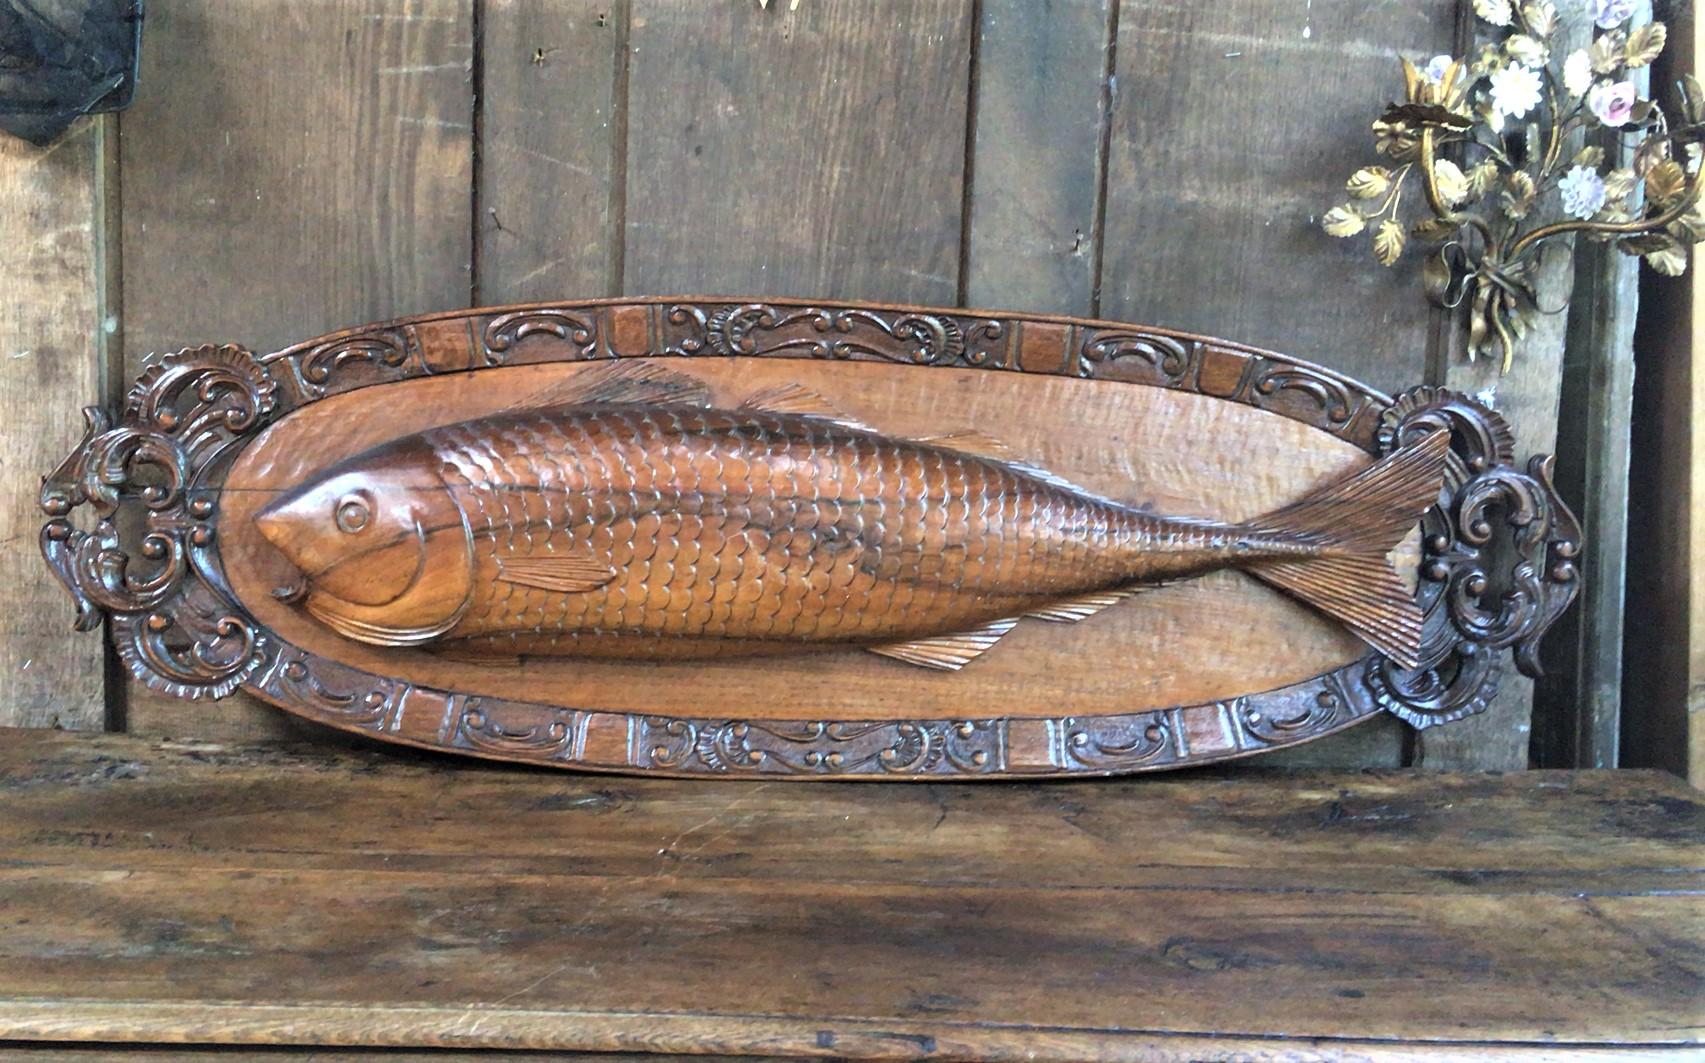 Oversize and spectacular 19th century Black Forest carved wood trophy wall plaque with a large fish.
Beautiful carved border with acanthus leaves.
Measure: Length / 45.5 inches.